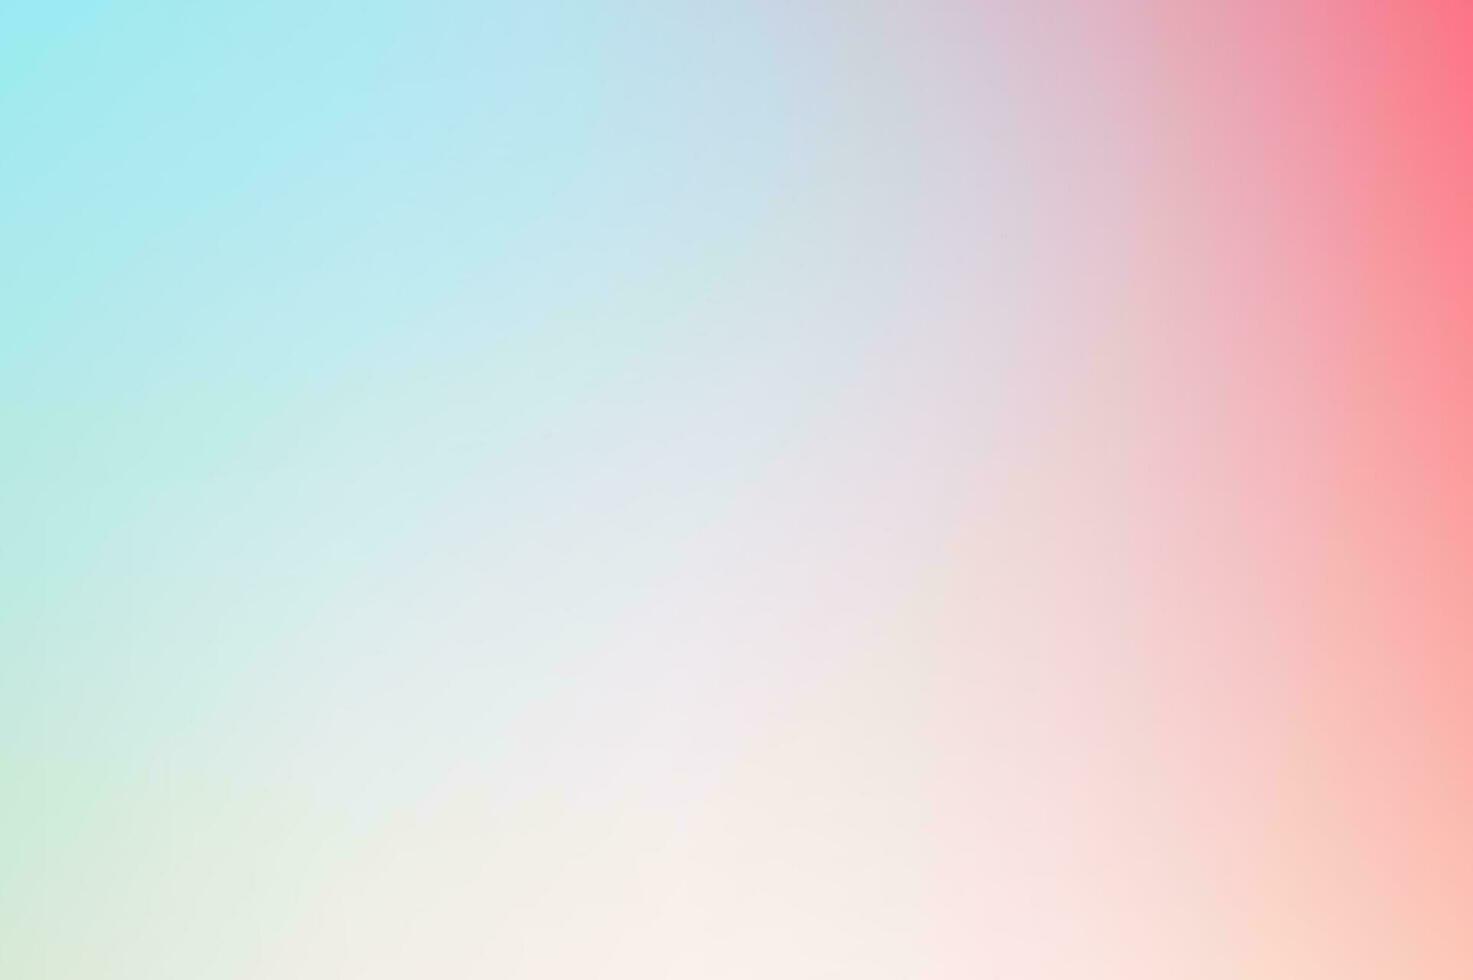 blue red pastel color soft gradient background for cover print and web design vector